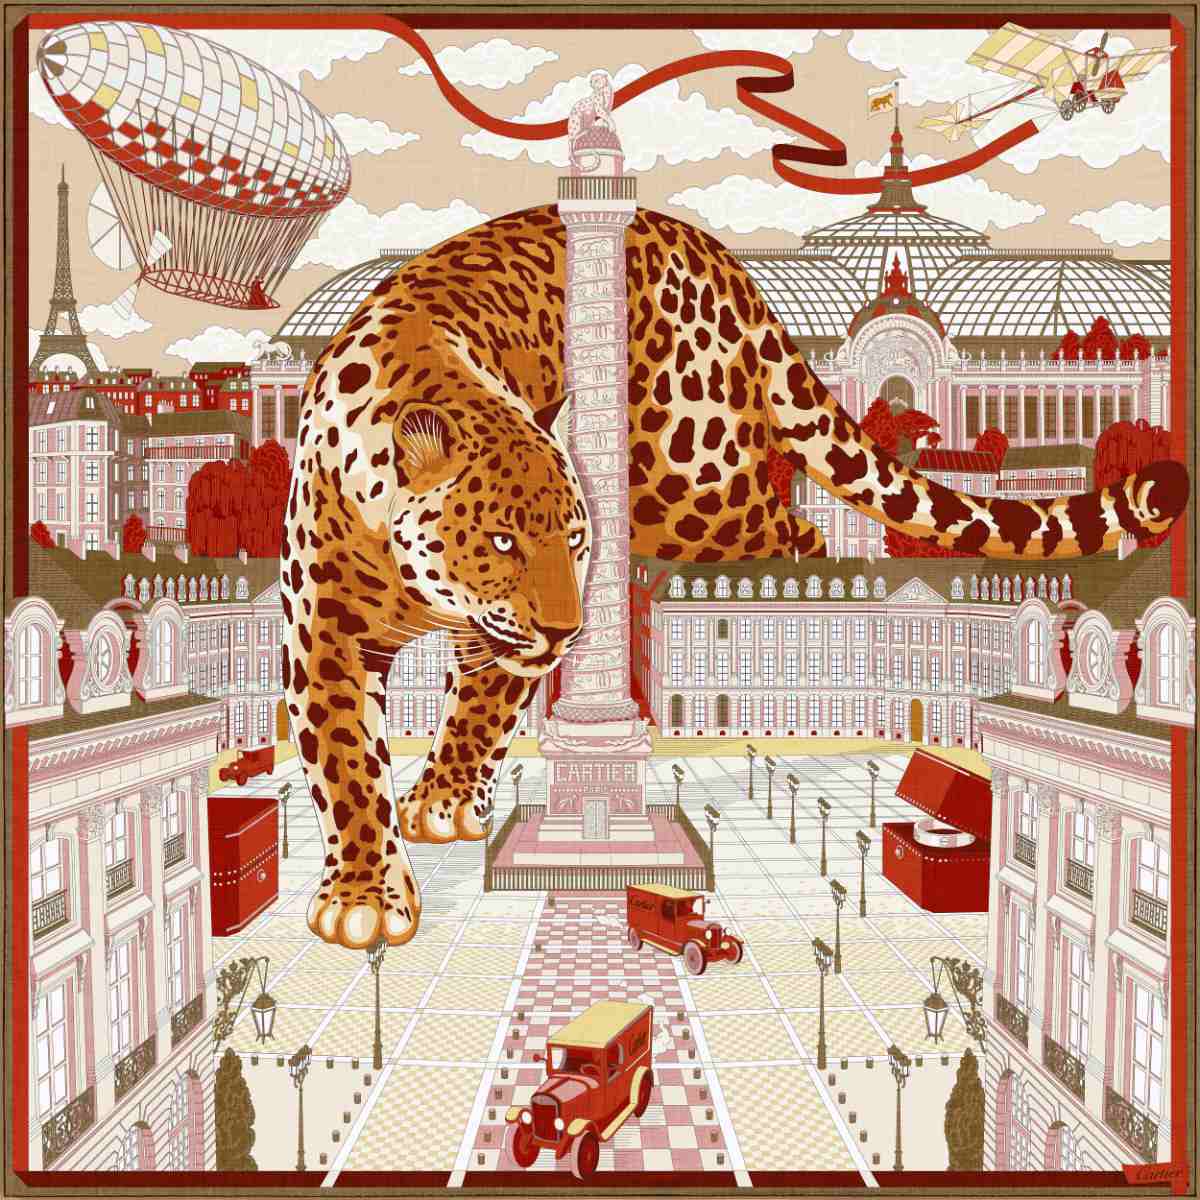 When Cartier Scarves Tell The Story Of The Panther